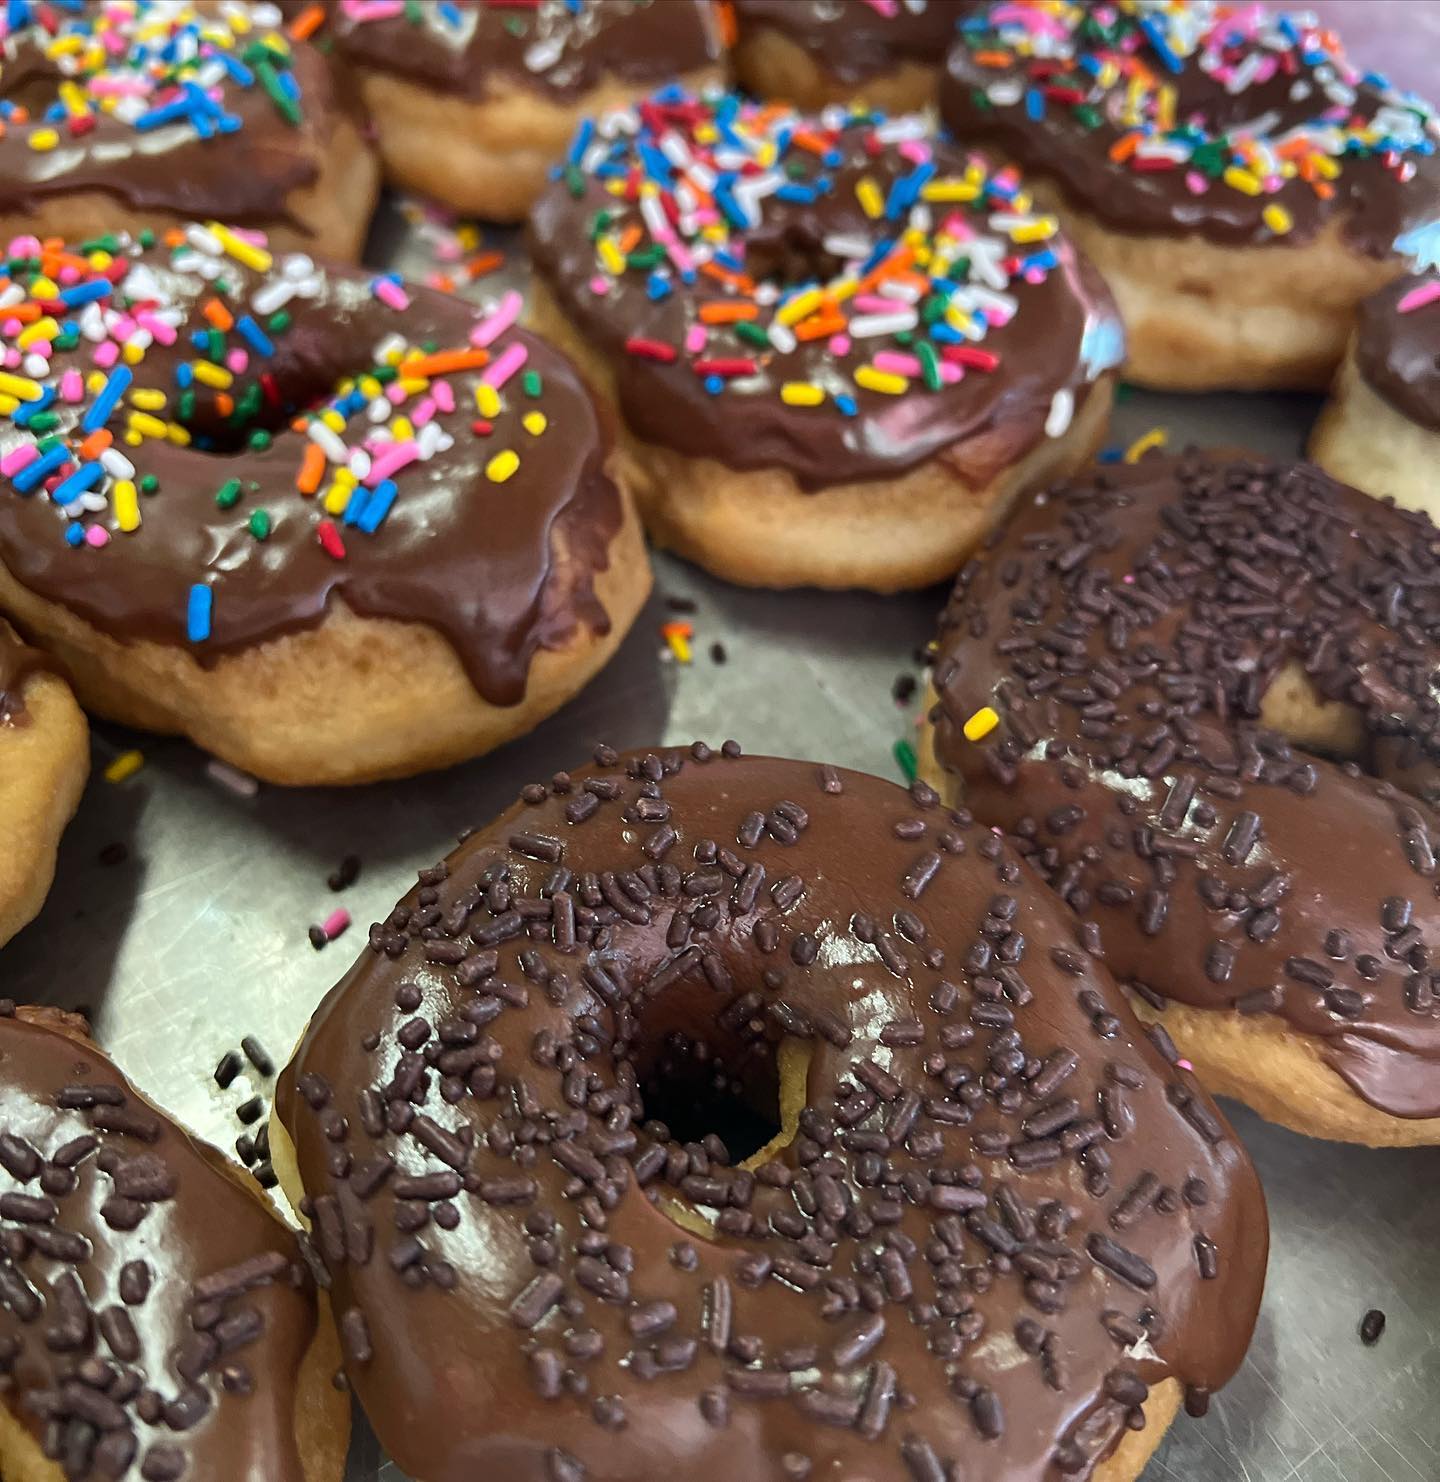 An up-close image of a variety of chocolate donuts with colorful sprinkles as well as only chocolate sprinkles on alternating donuts. These donuts are from Lindsay's Bakery in Circleville, OH.